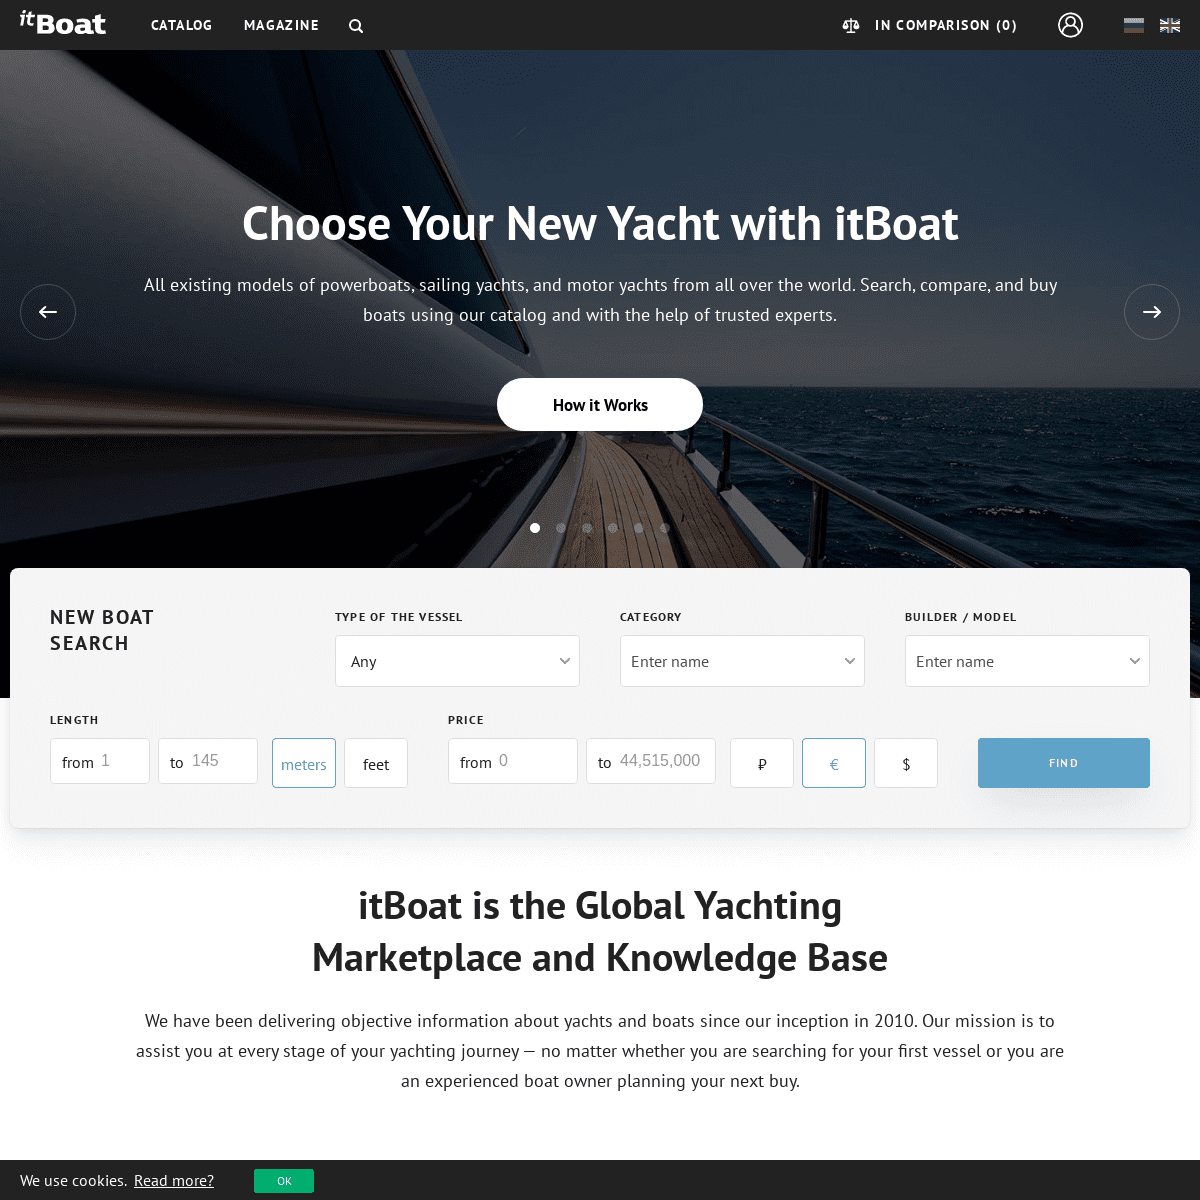 A complete backup of https://itboat.com